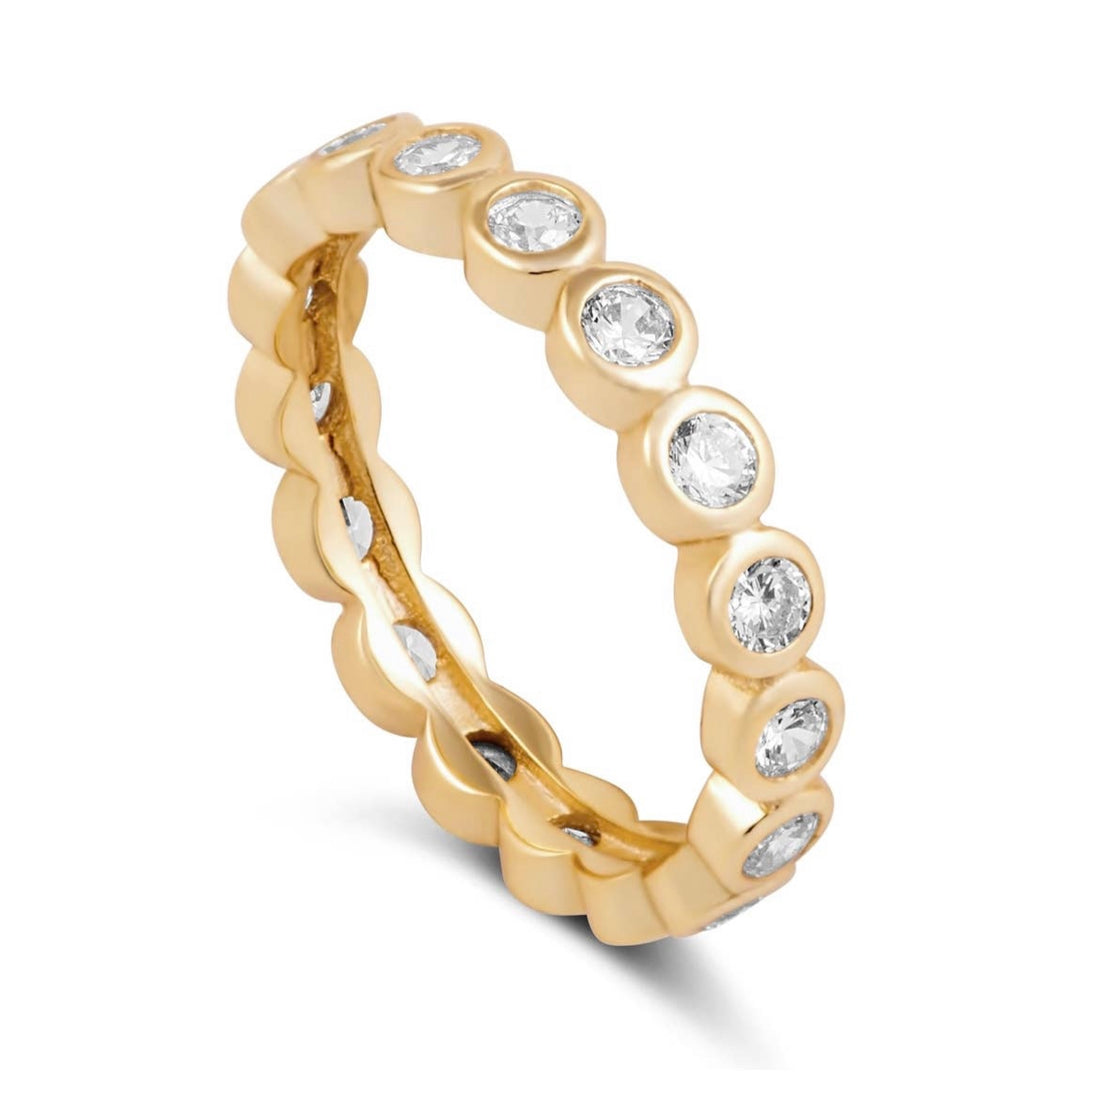 Celeste Ring in Gold with Clear Stones